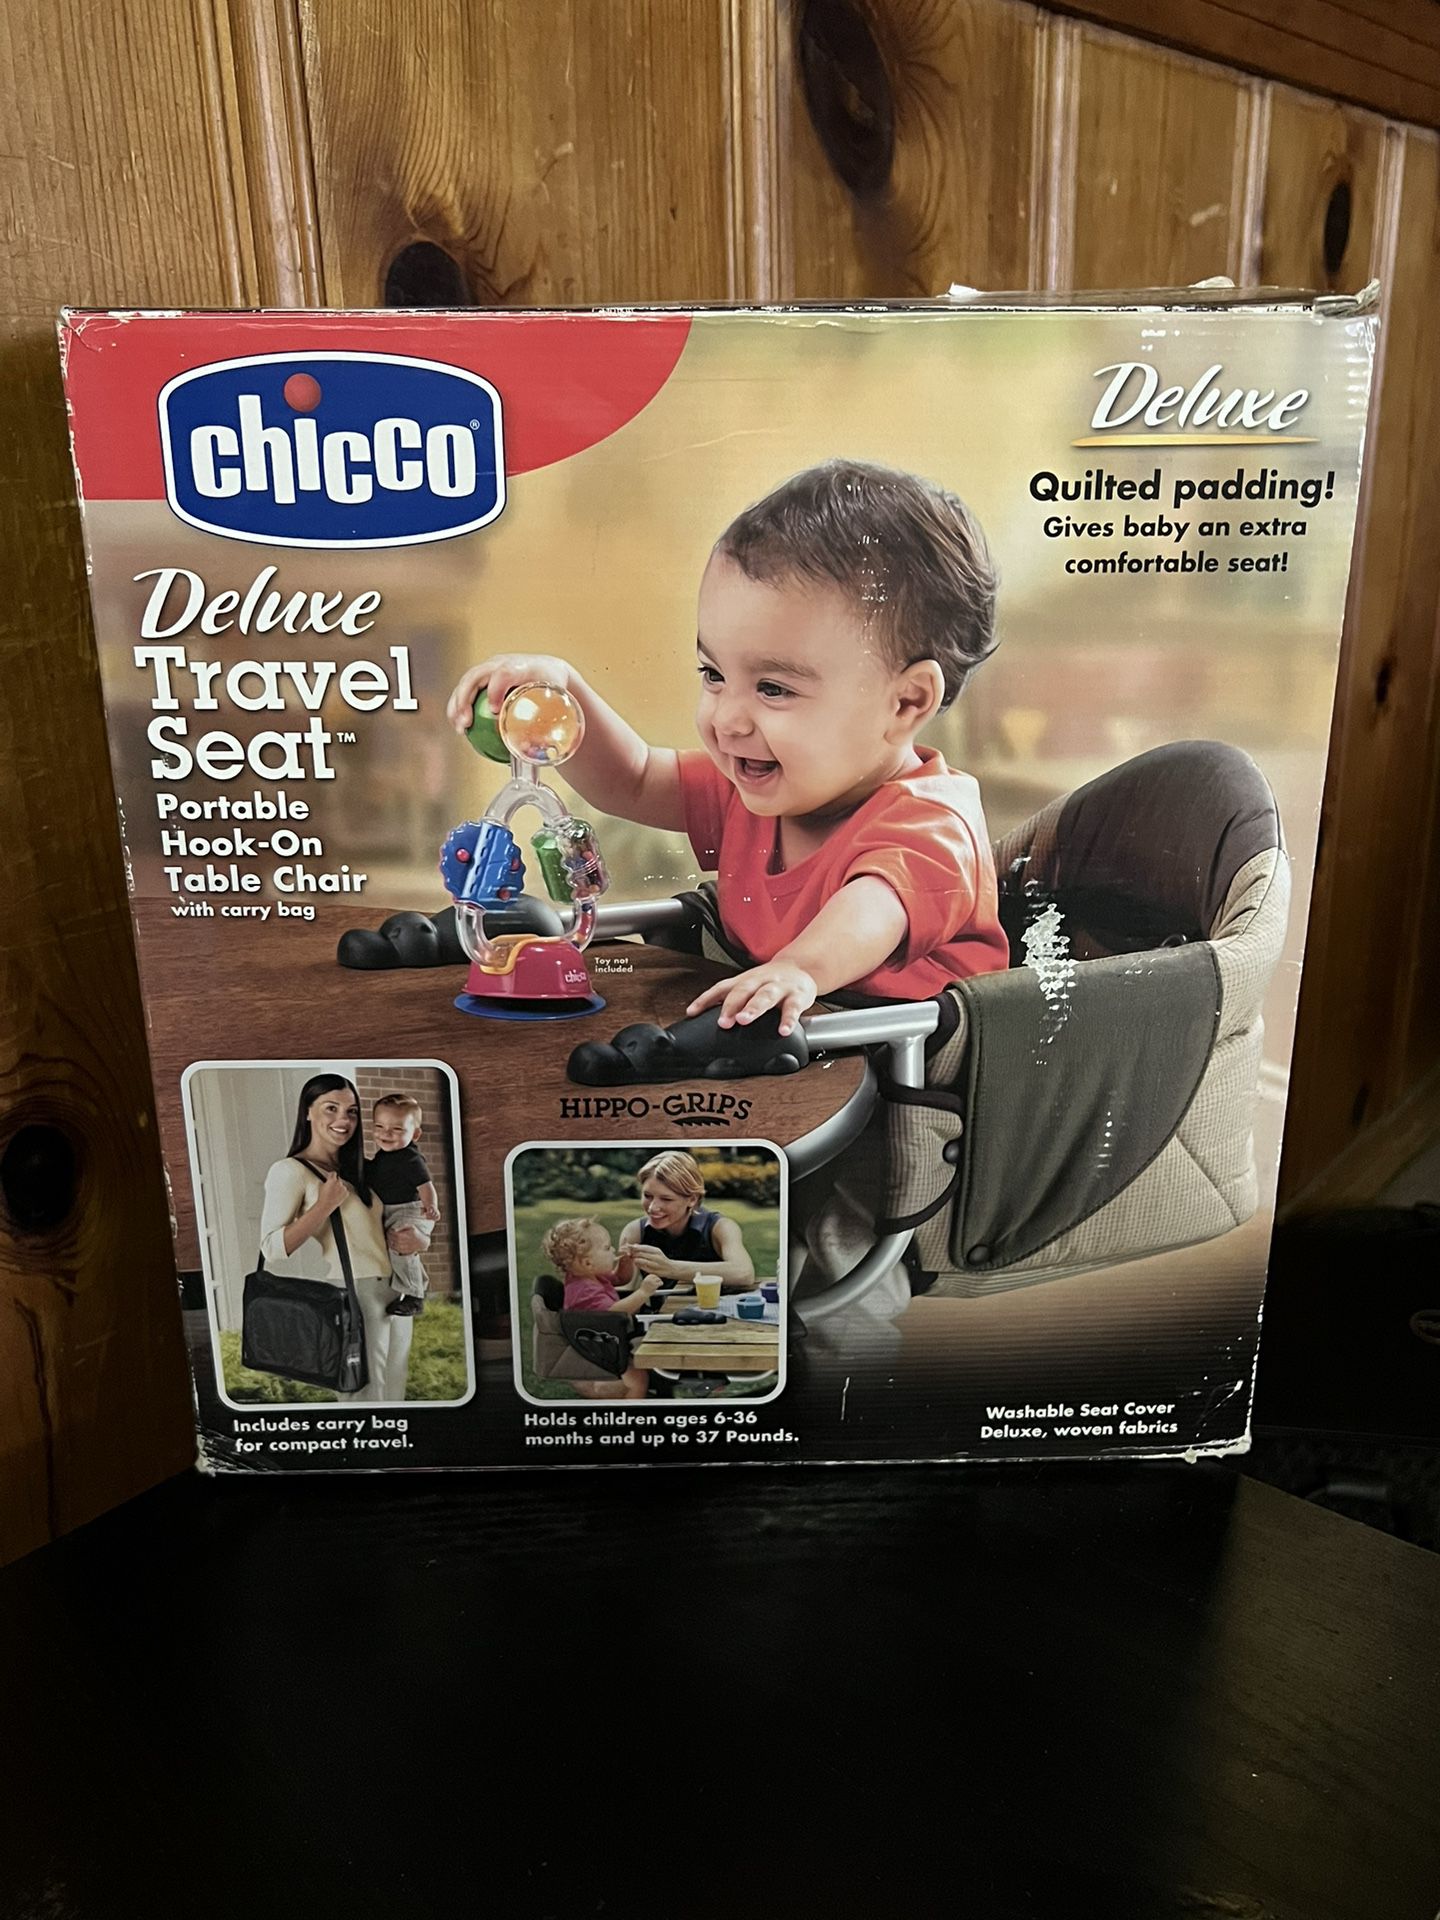 Chicco Deluxe Travel  Seat  Portable  Hook - On Table Chair